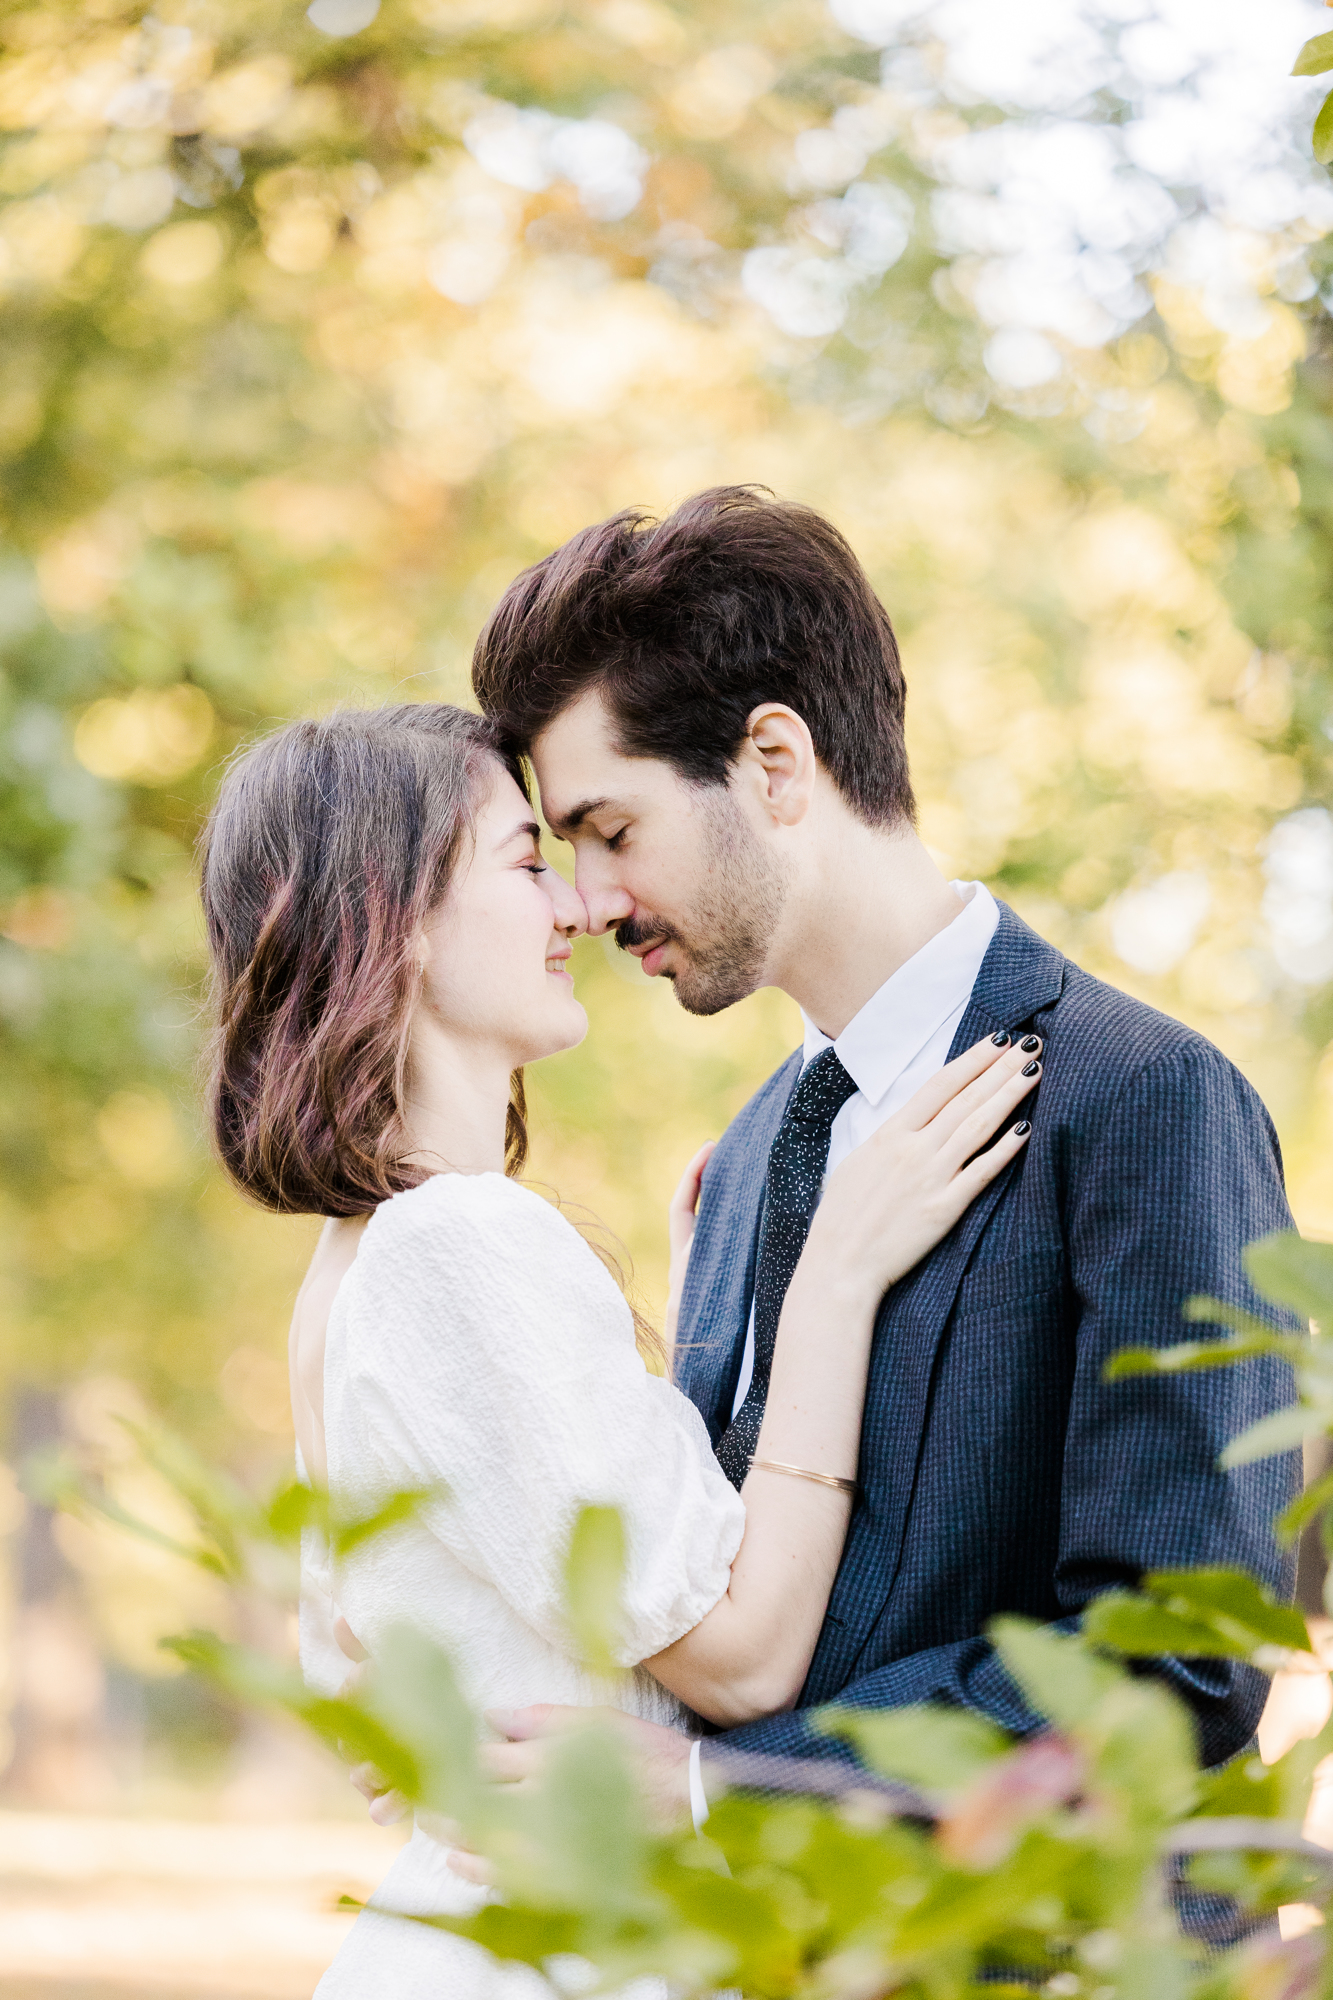 Vibrant Central Park Engagement Photos in NYC